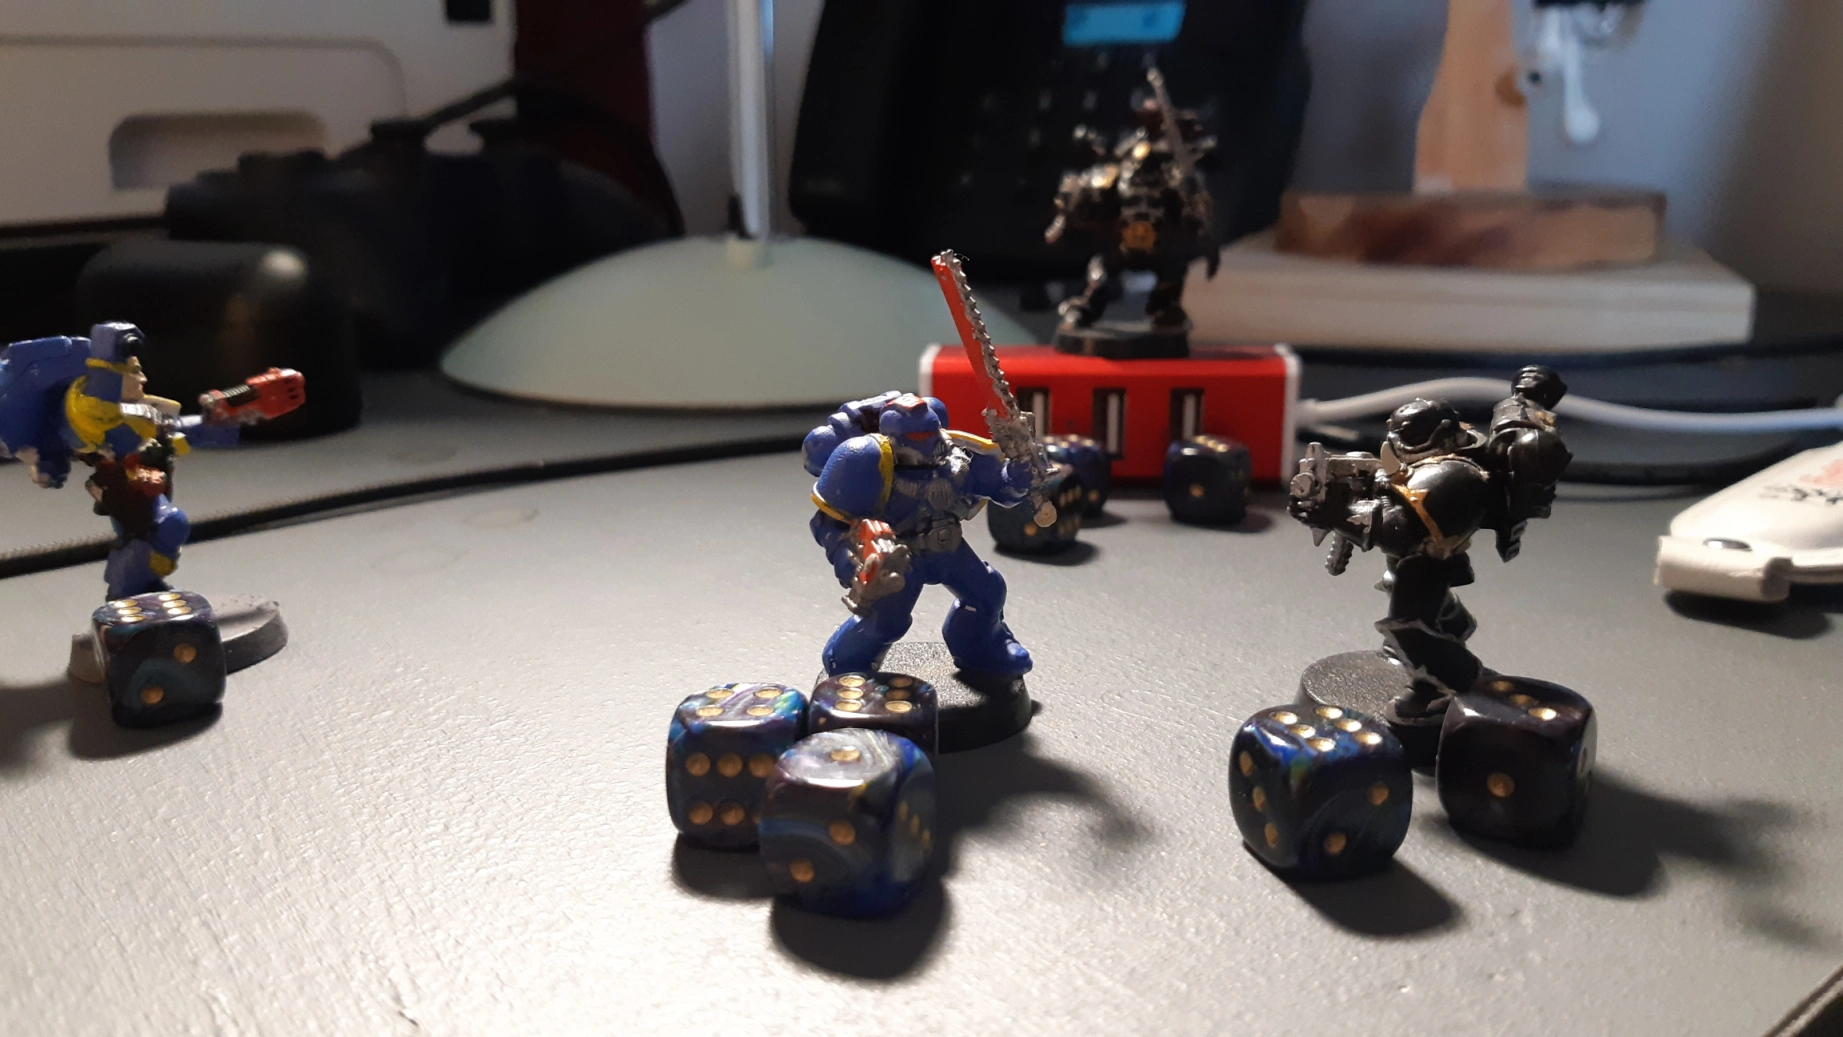 Tiny toy soldiers fight to the death on my desk in an endless war that lasts no more than 5 minutes.